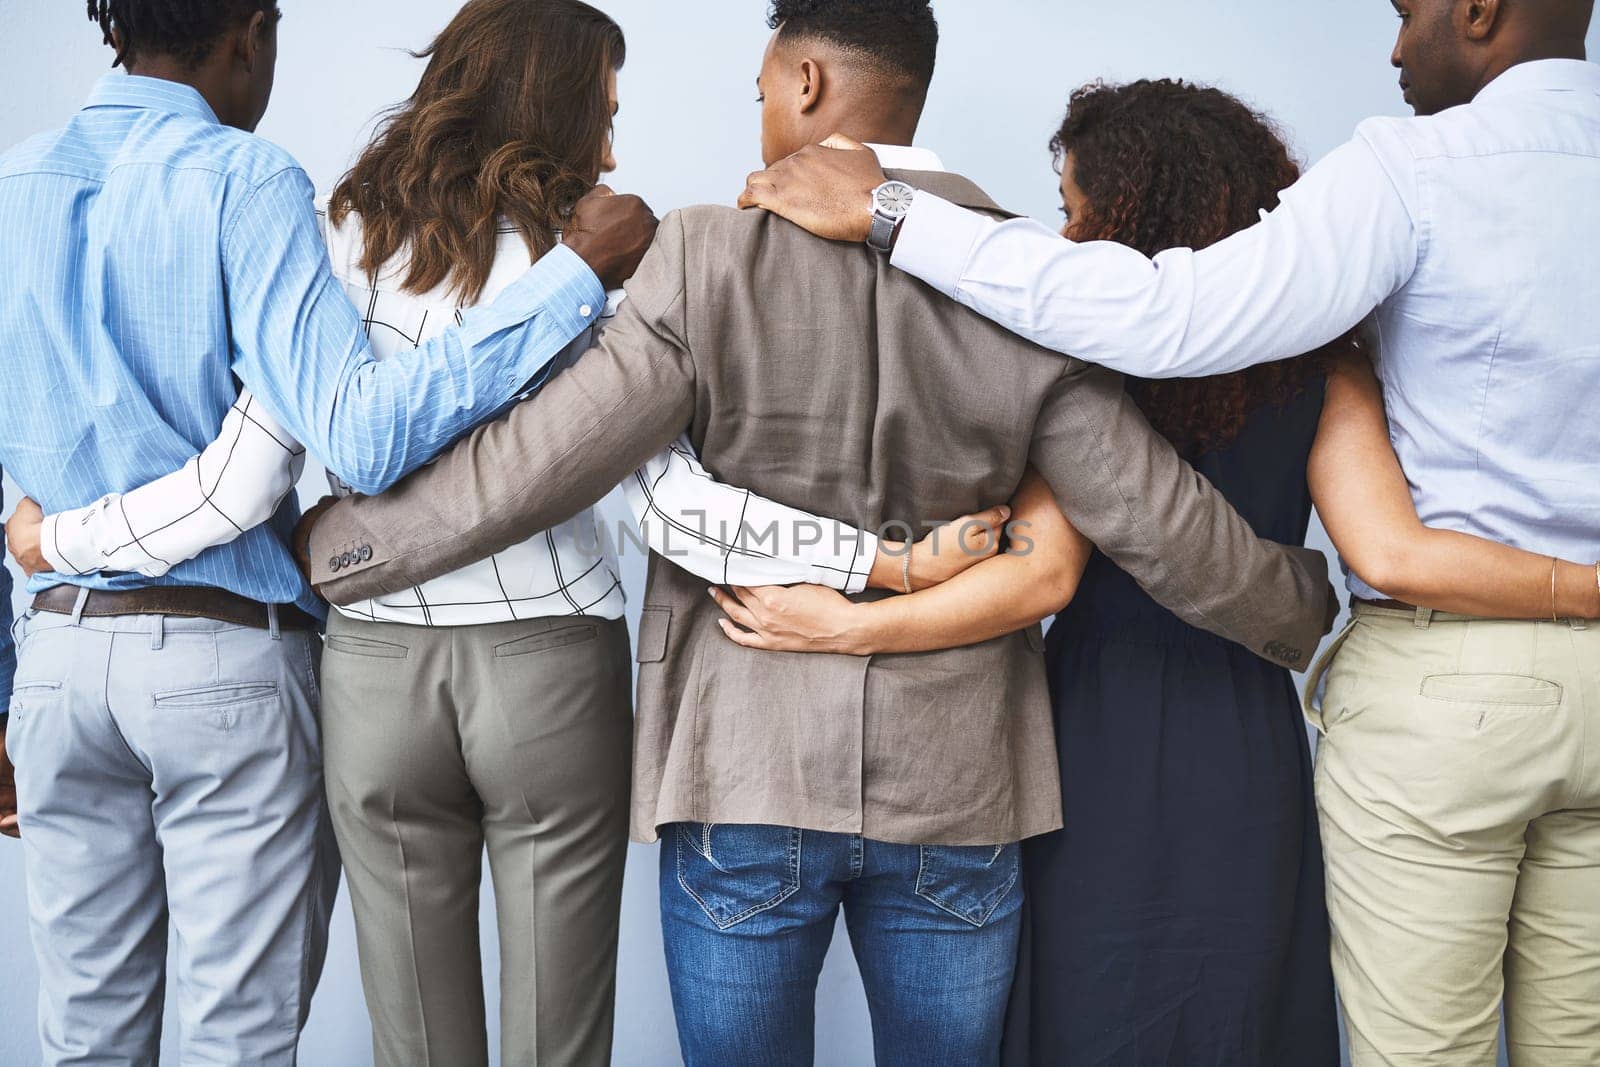 Strong teams have each others backs. Rearview studio shot of a group of businesspeople embracing against a gray background